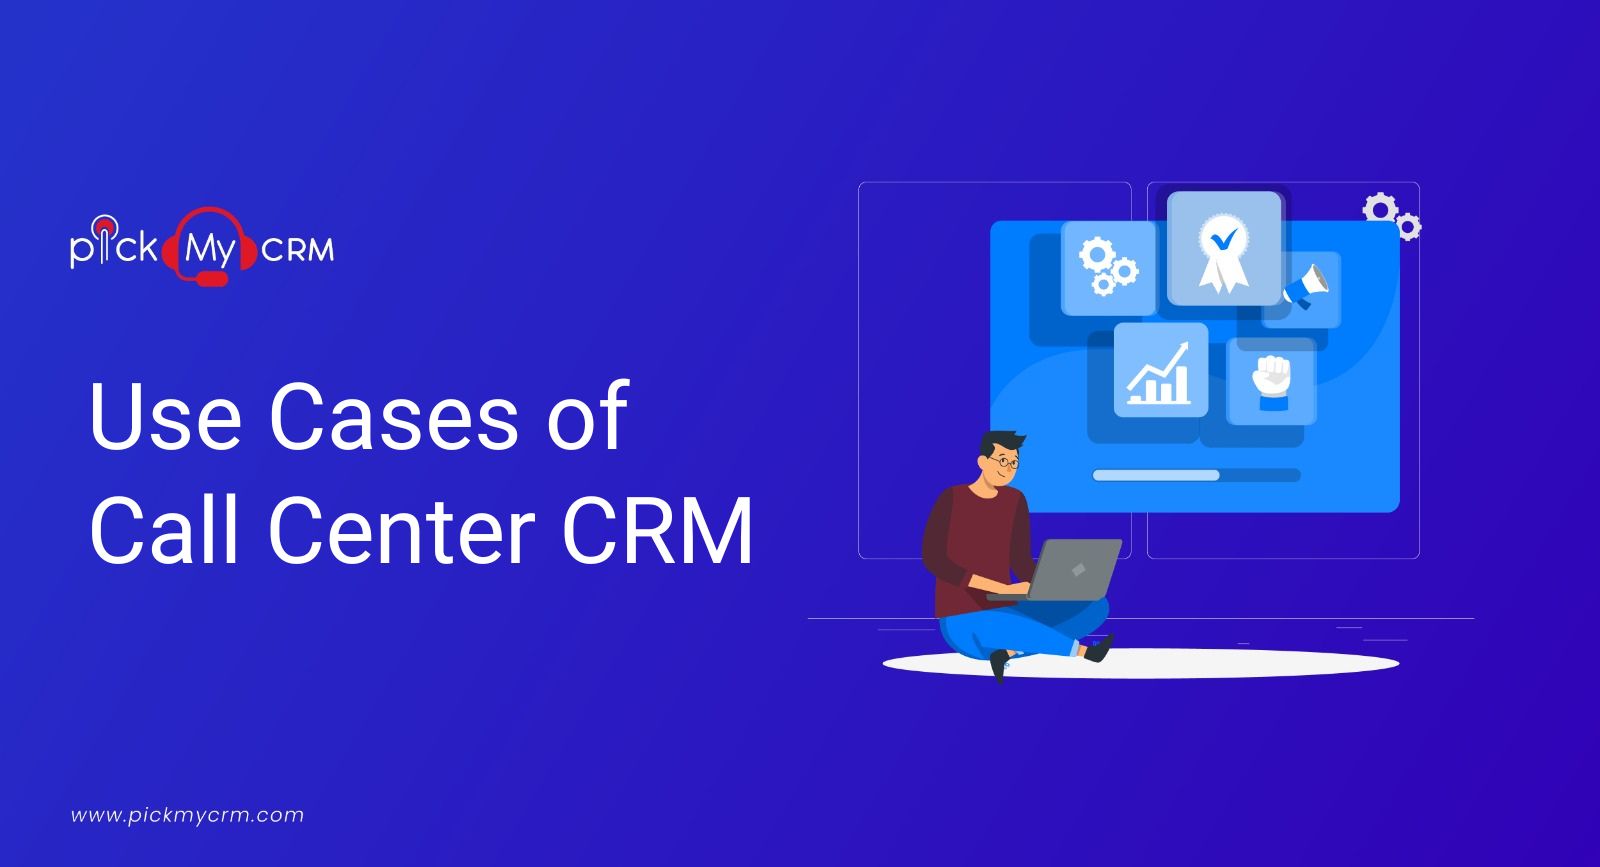 Exploring the Use Cases of Call Center CRM